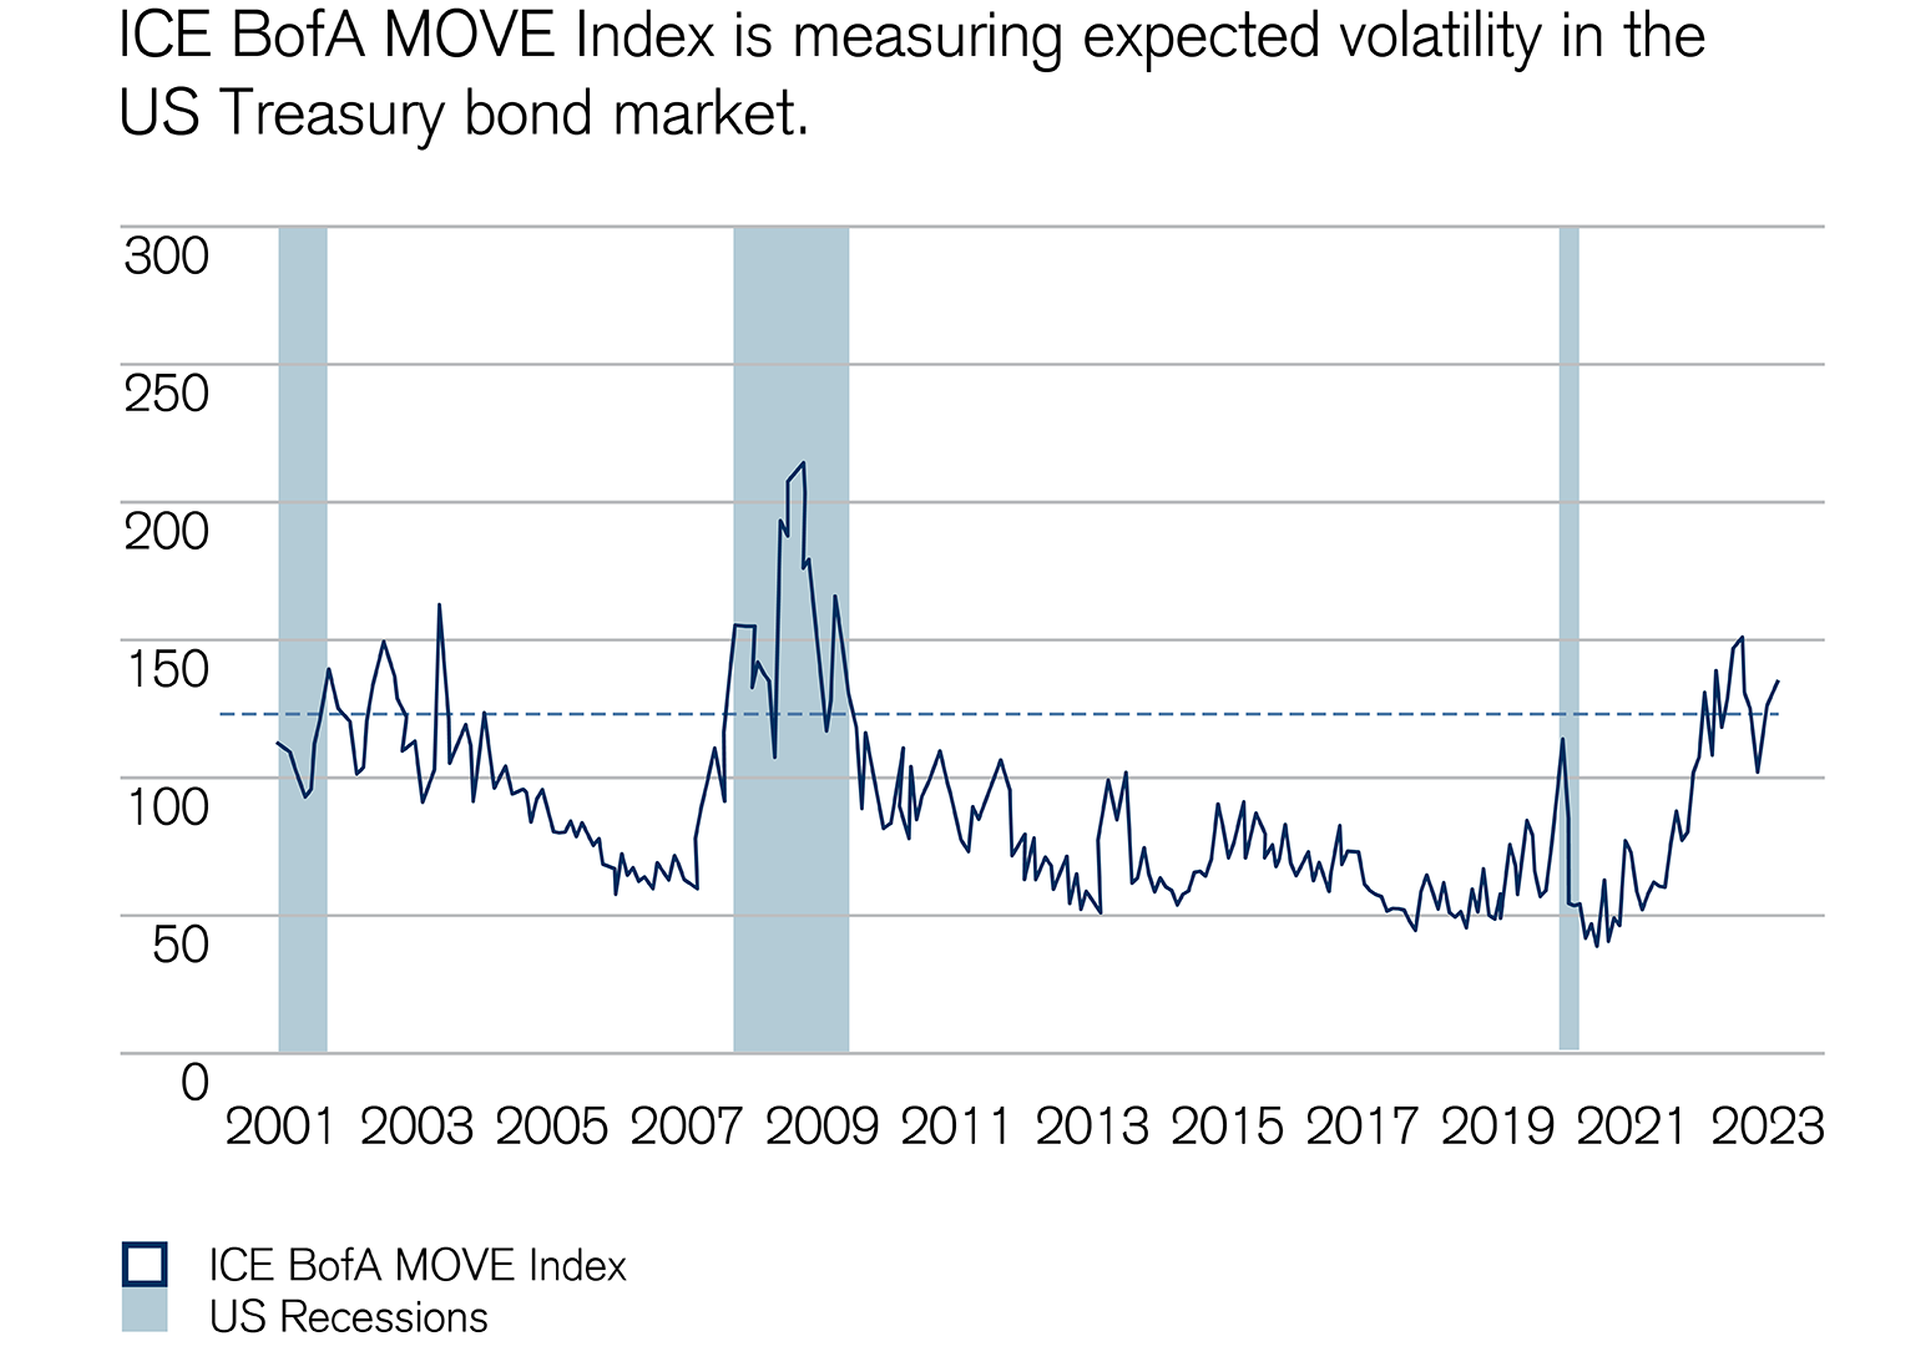 Equity markets: High interest rate volatility